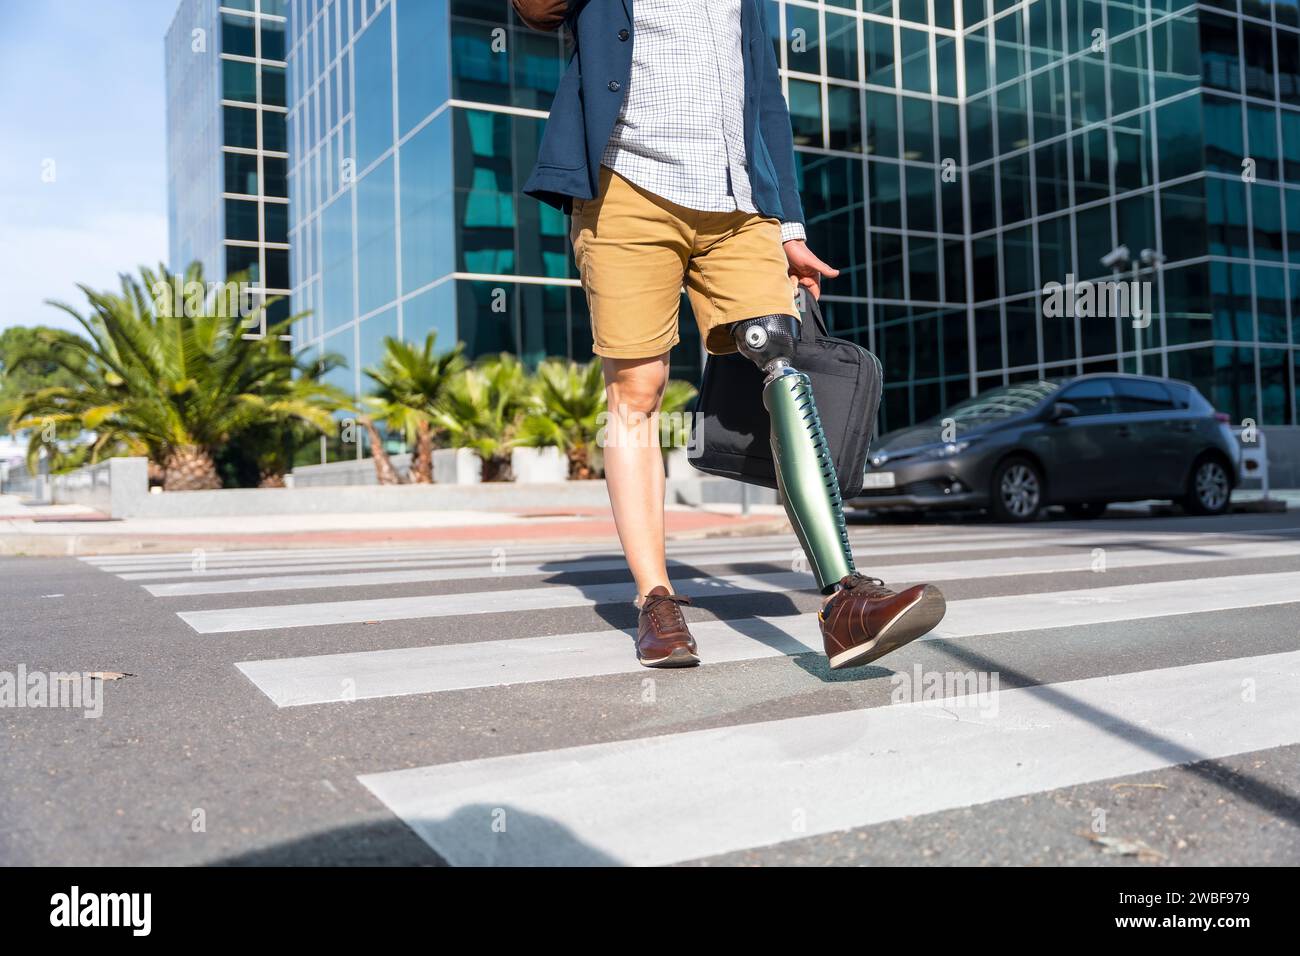 Unrecognizable businessman with prosthetic leg walking in the city Stock Photo